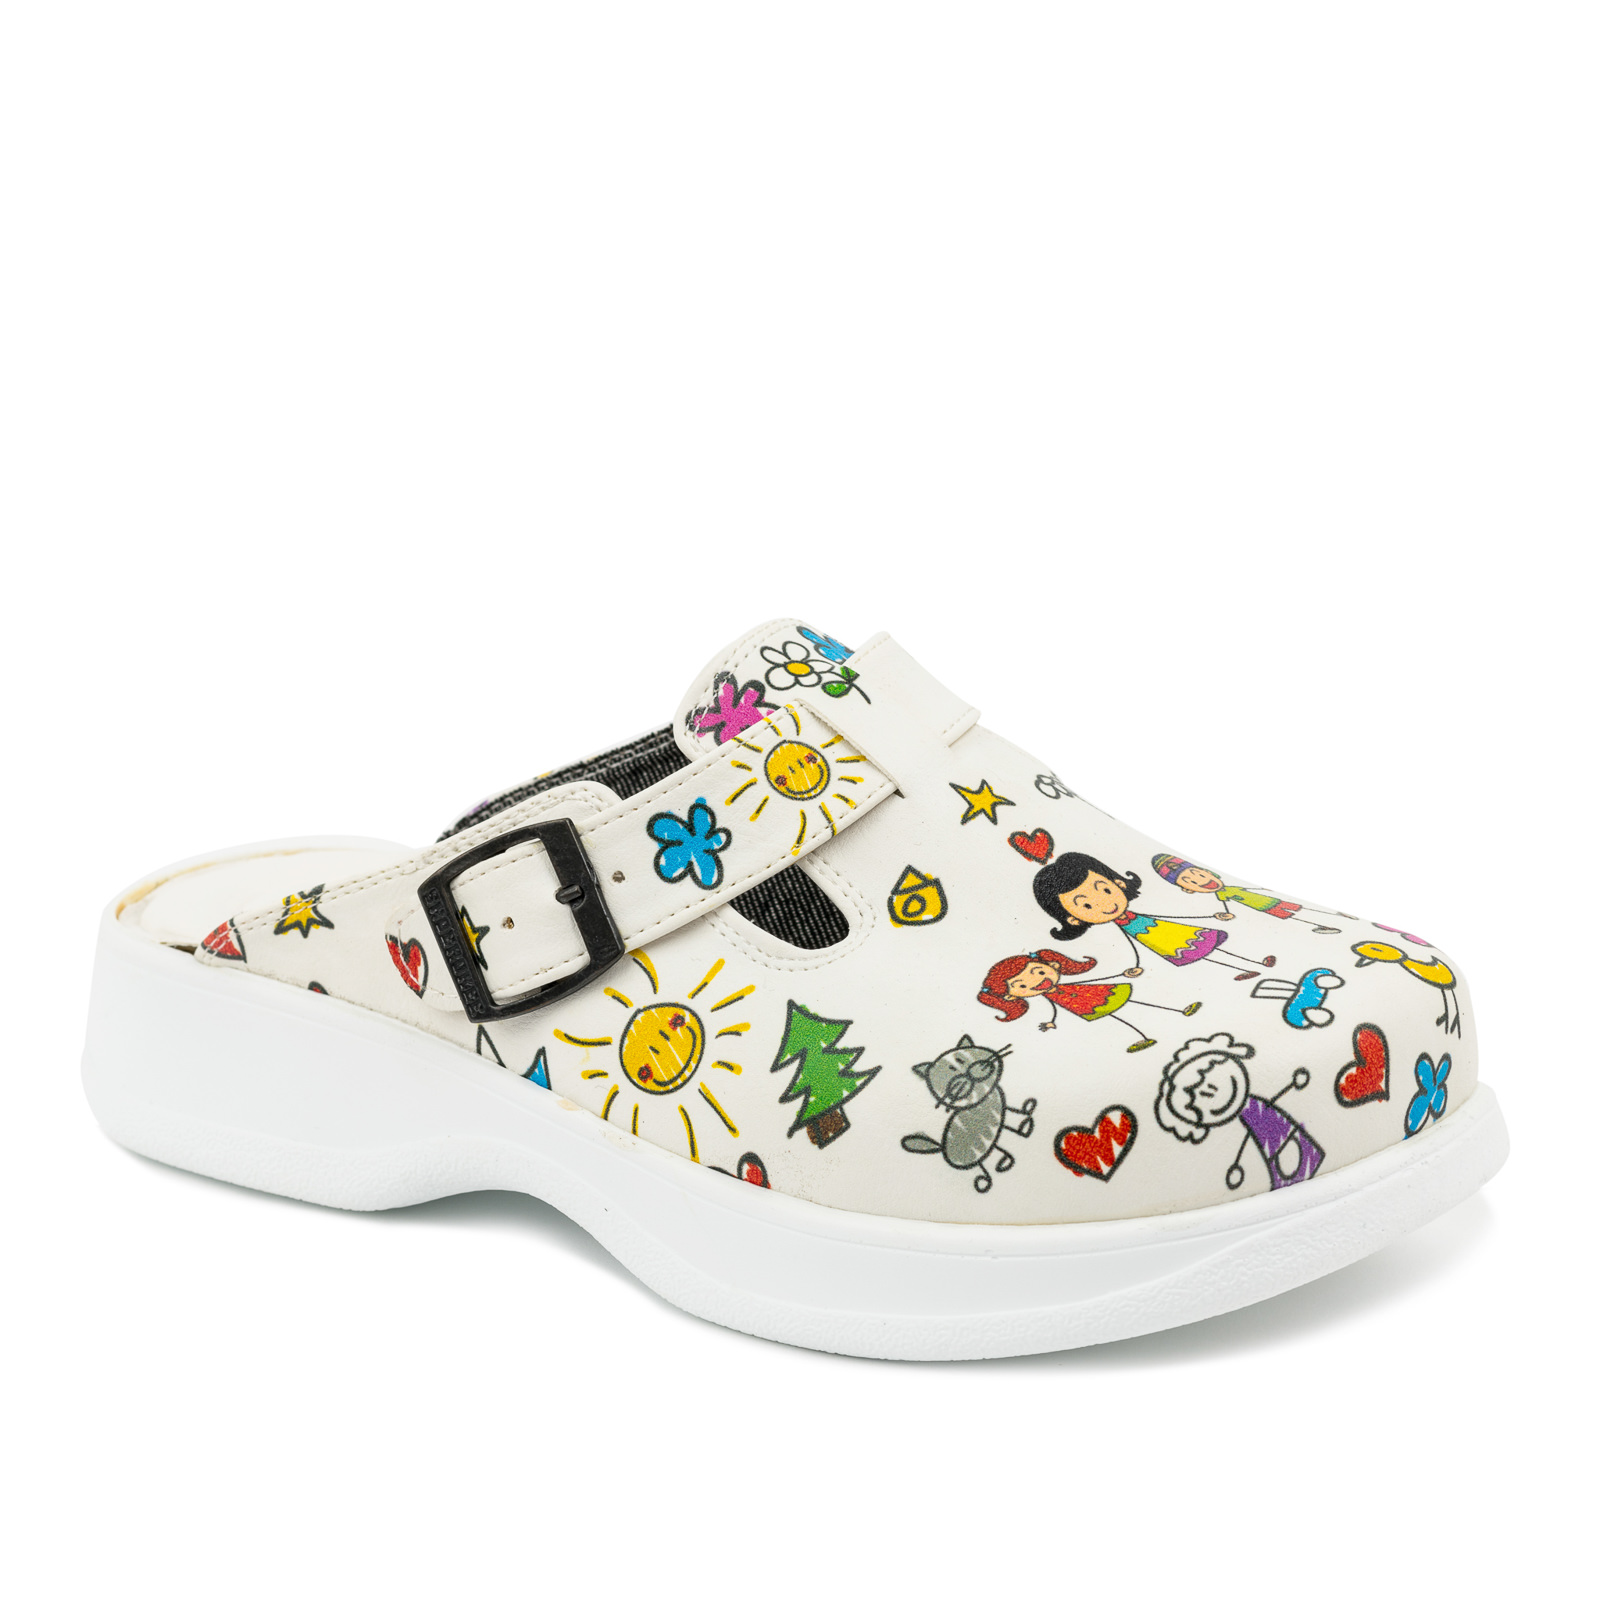 Patterned women clogs A015 - FAMILY - WHITE